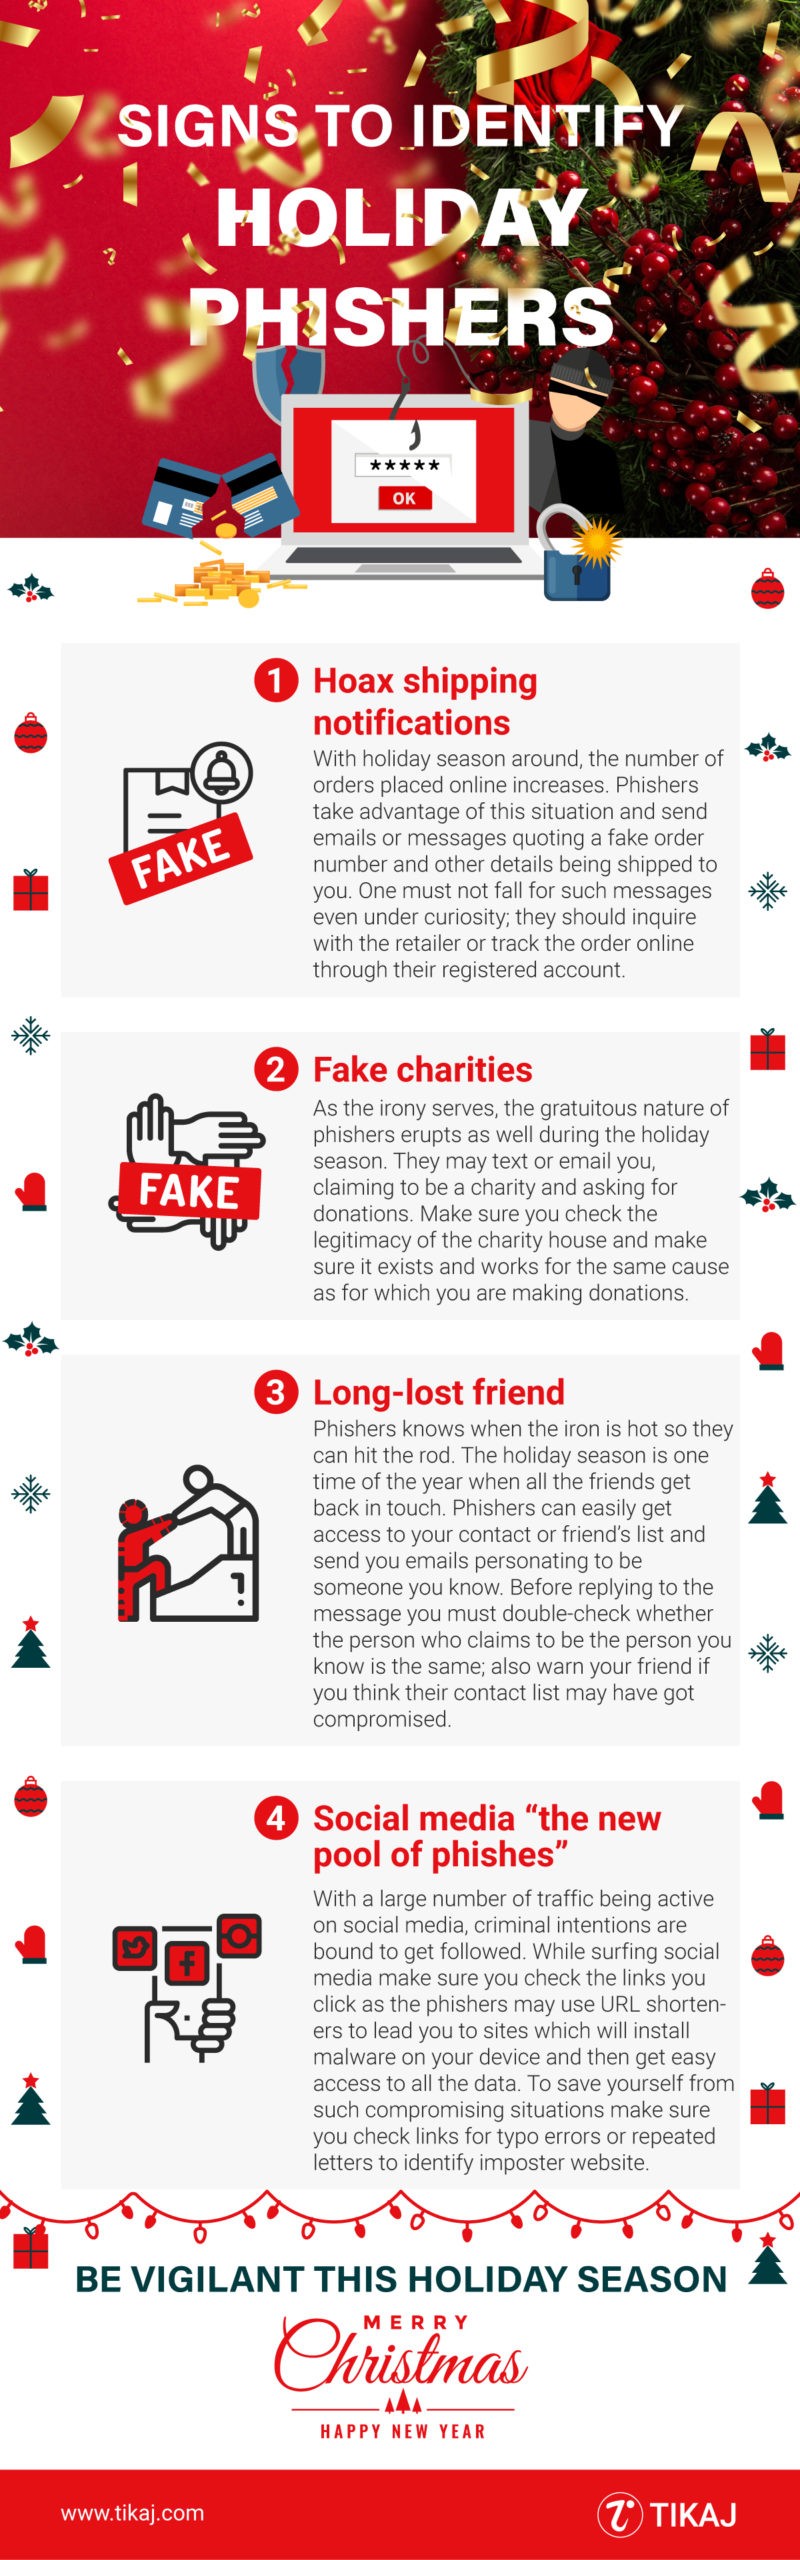 Signs to identify Holiday phishers